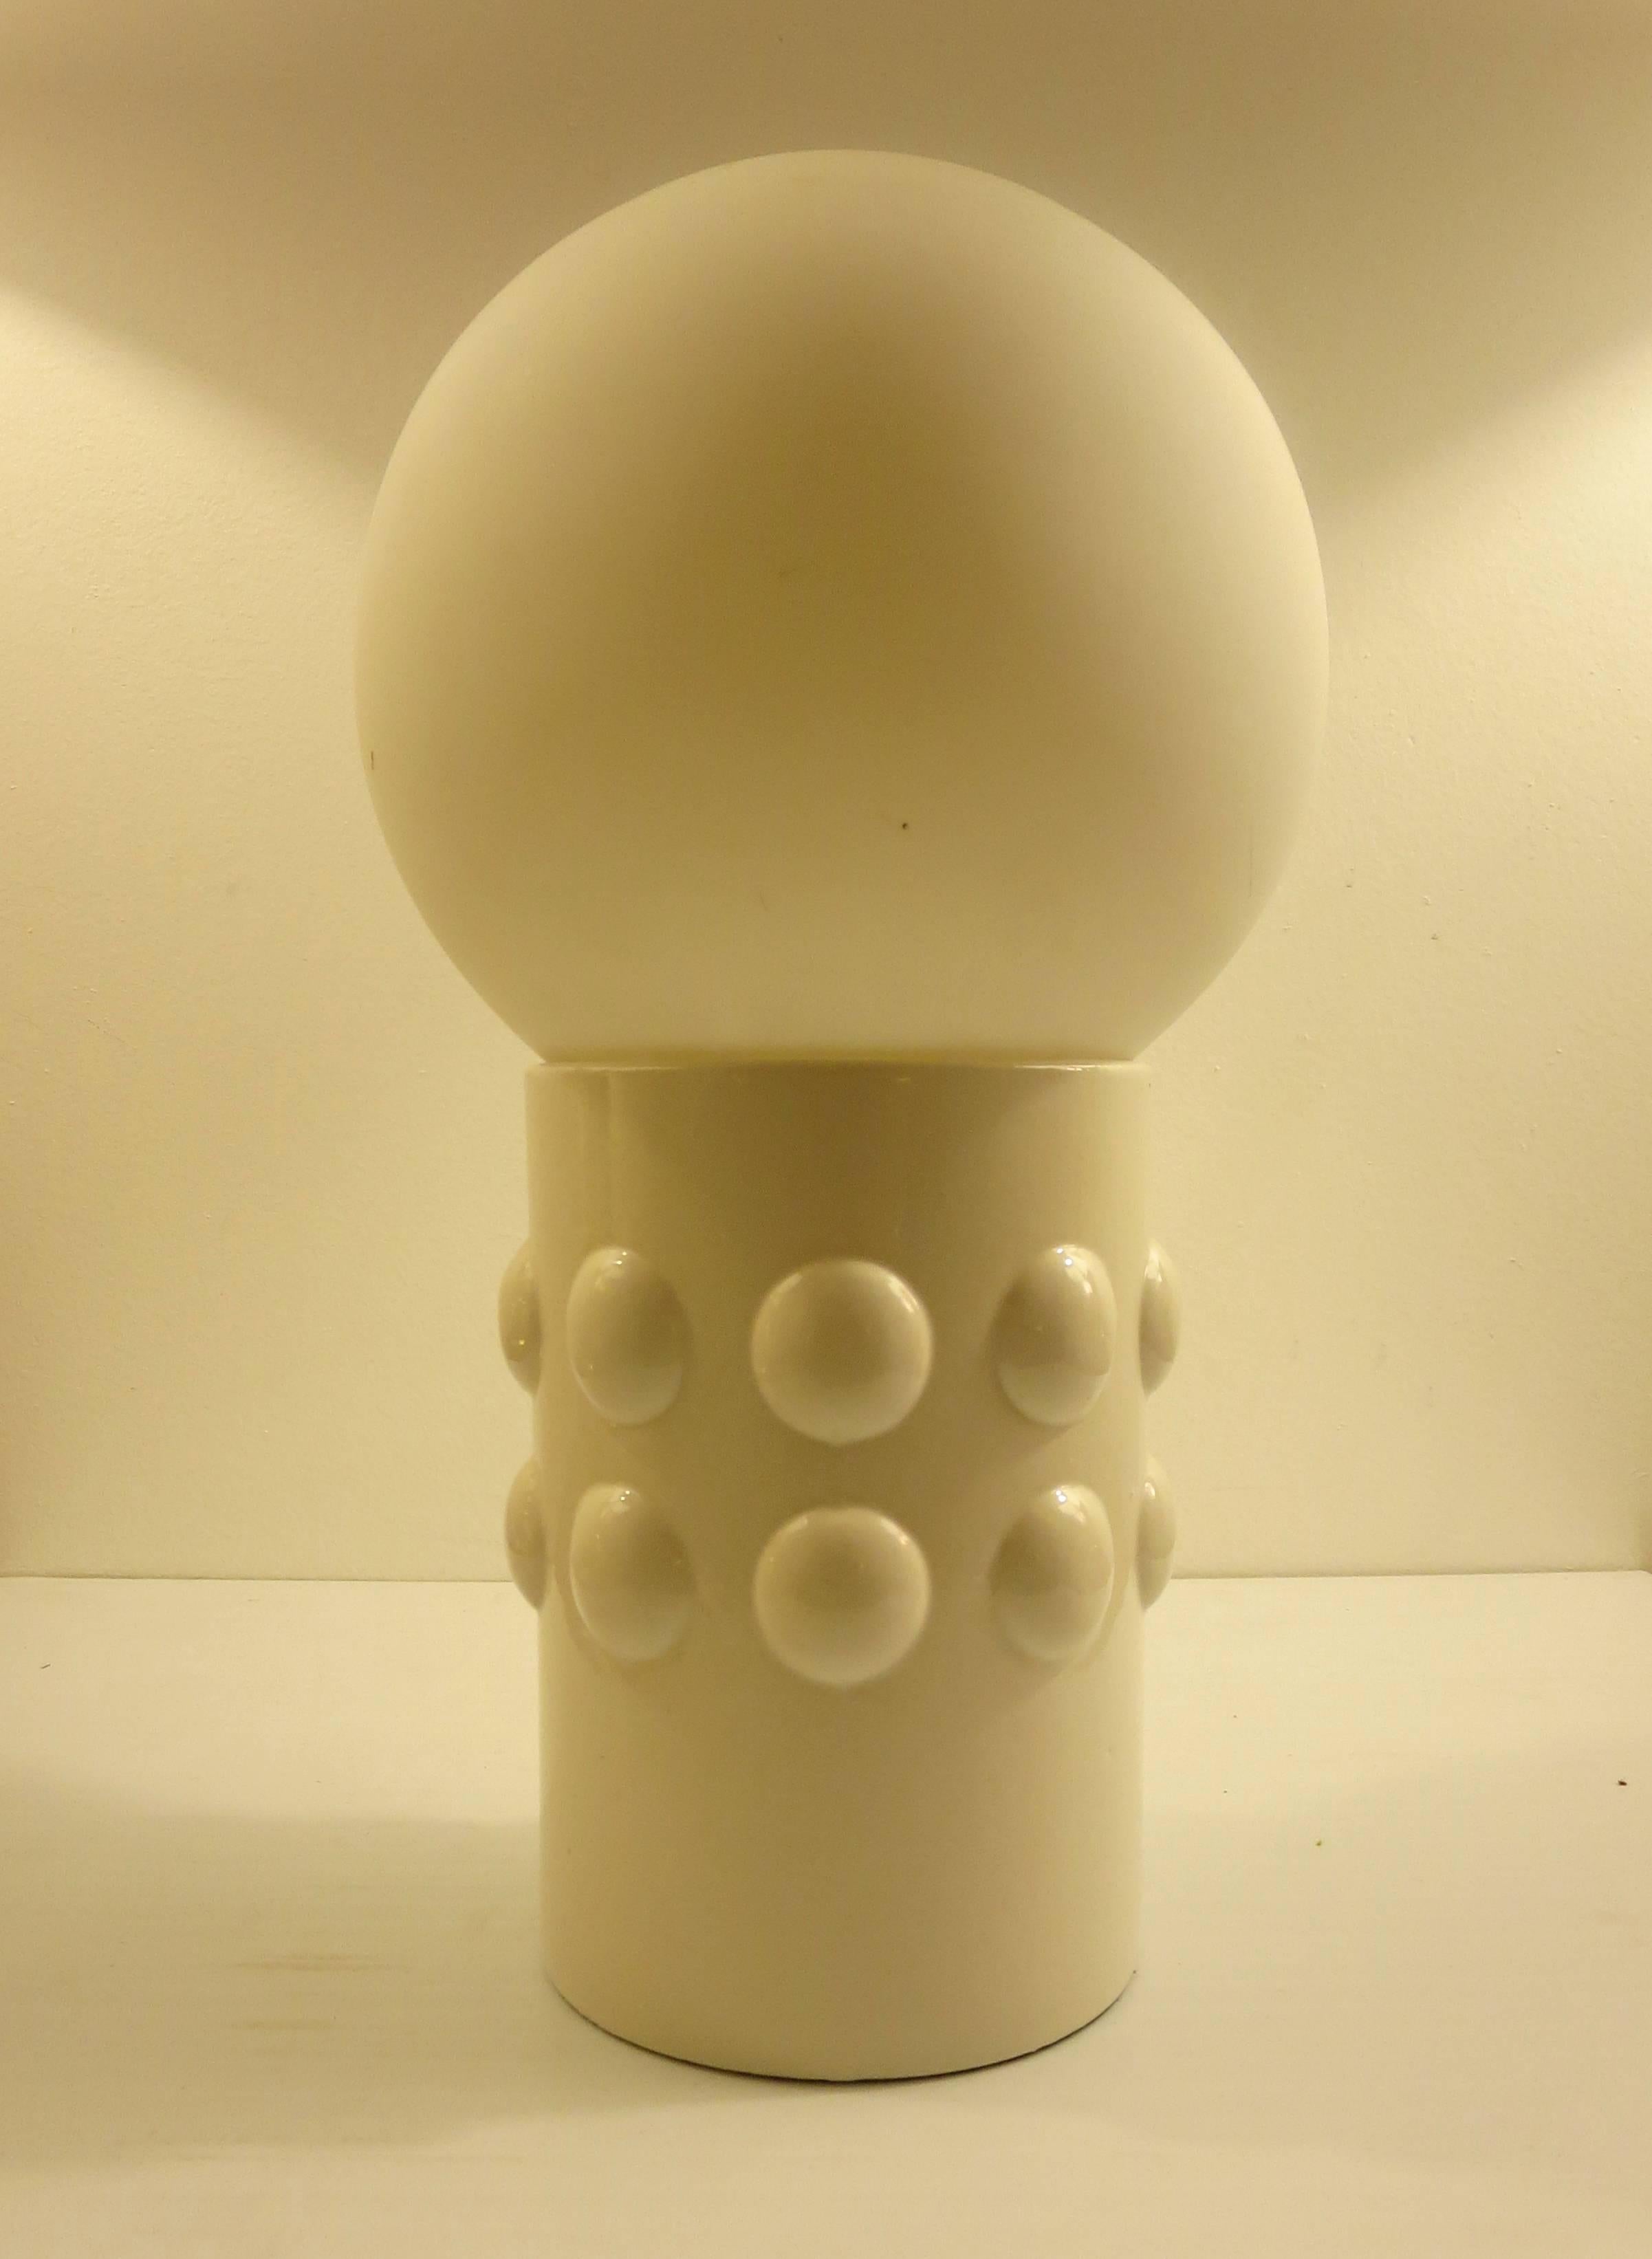 Great and simple design on this Italian ceramic white gloss base on frosted glass ball shade, circa 1970s, great Iconic pop space age piece, excellent condition beautiful glow when its lighted.